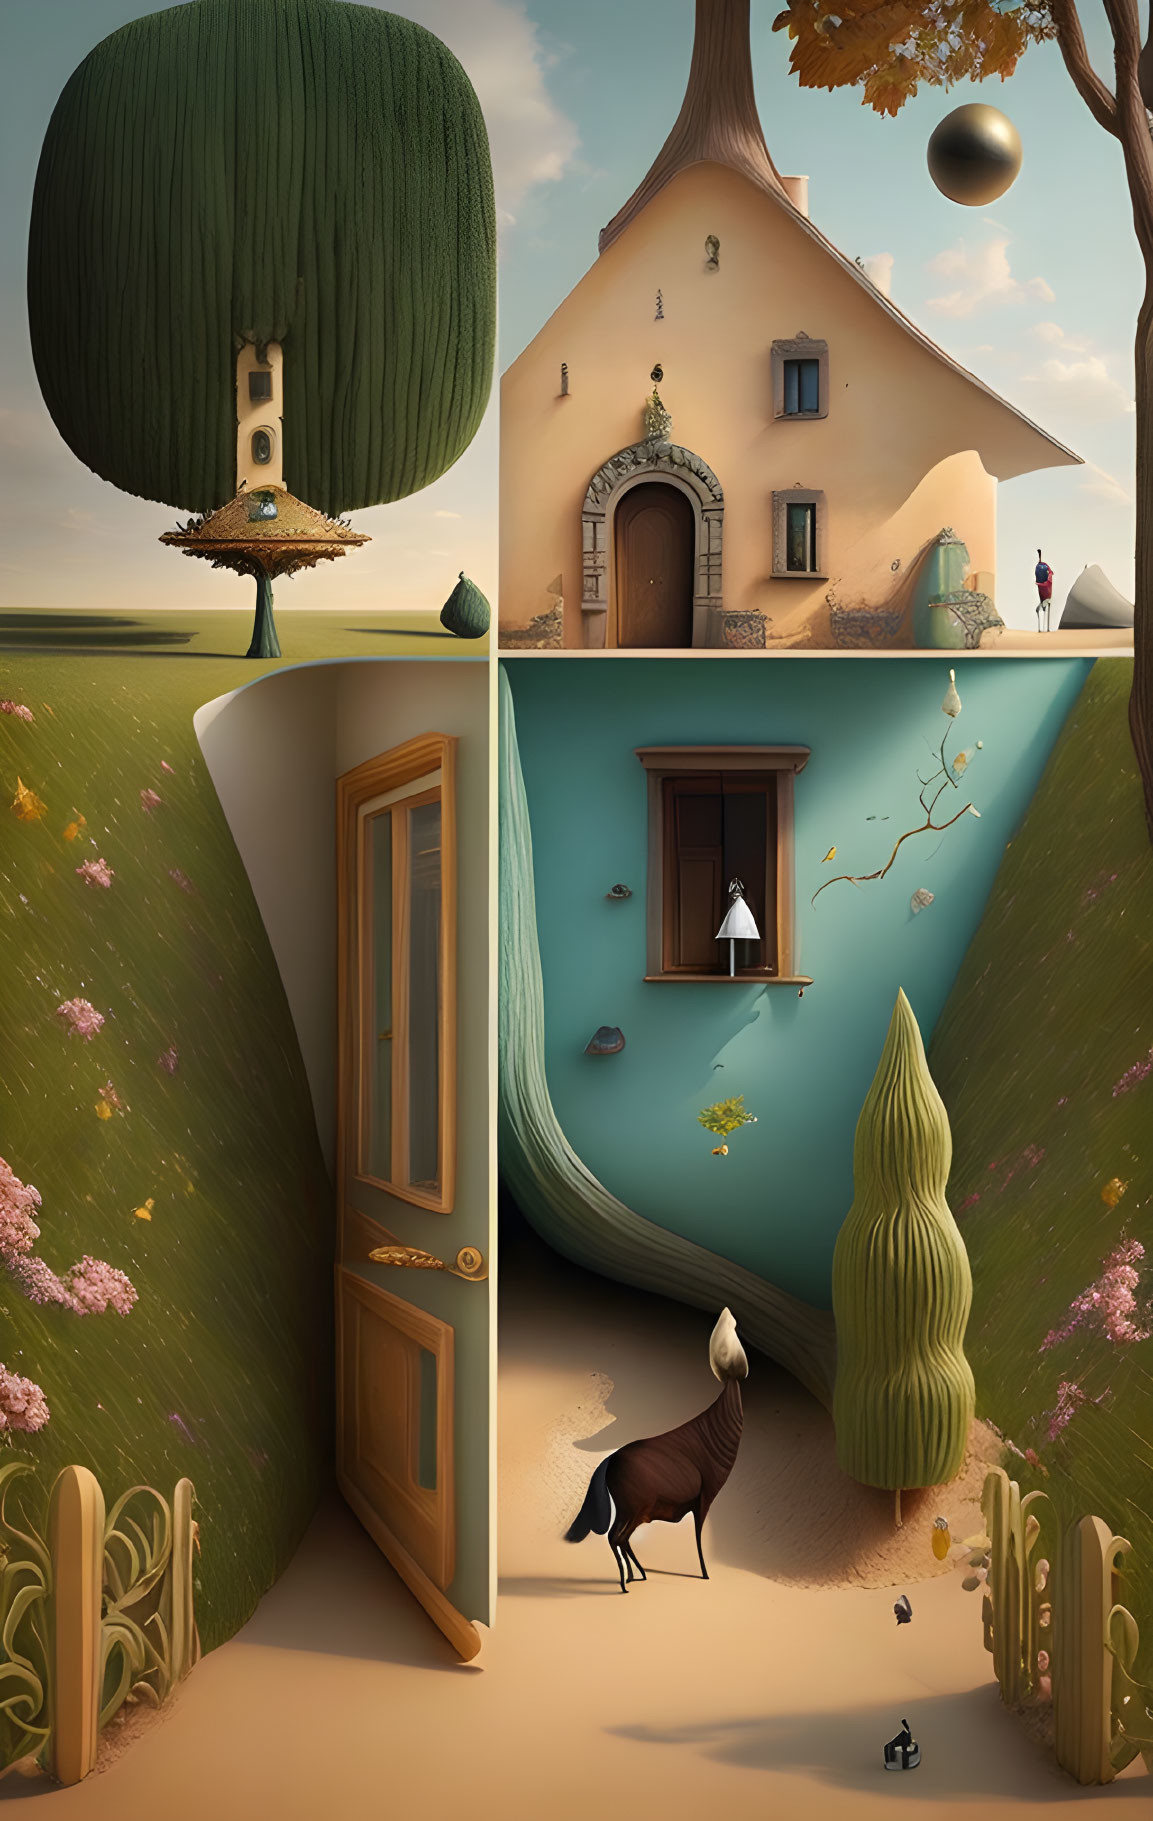 Surrealist landscape with inverted house, floating orb, tree doorway, and peeking horse